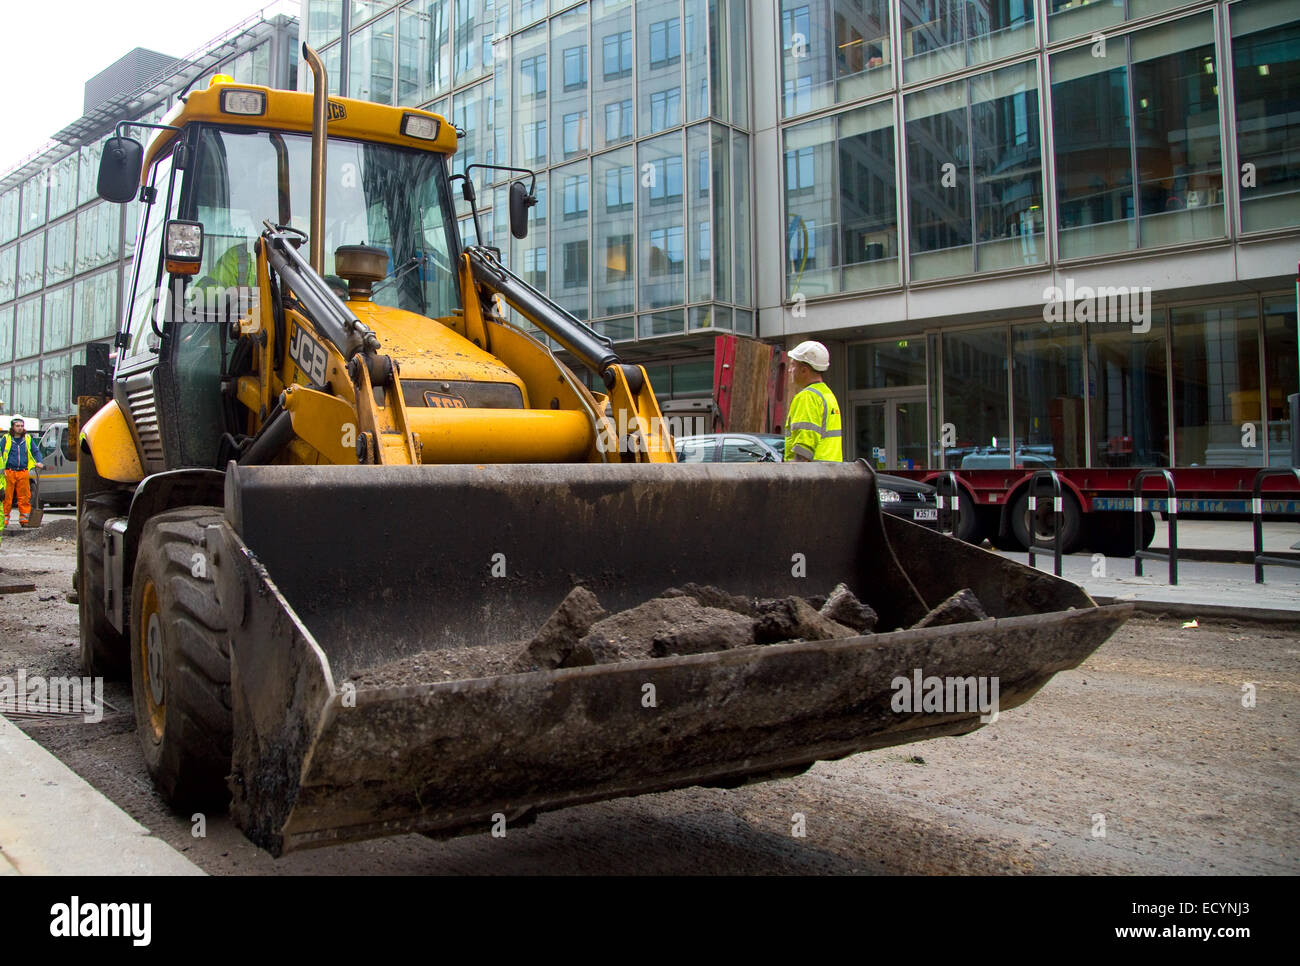 LONDON - OCTOBER 18TH: Unidentified workman operates a JCB on October 18th, 2014 in London, England, UK. JCB is one of the world Stock Photo